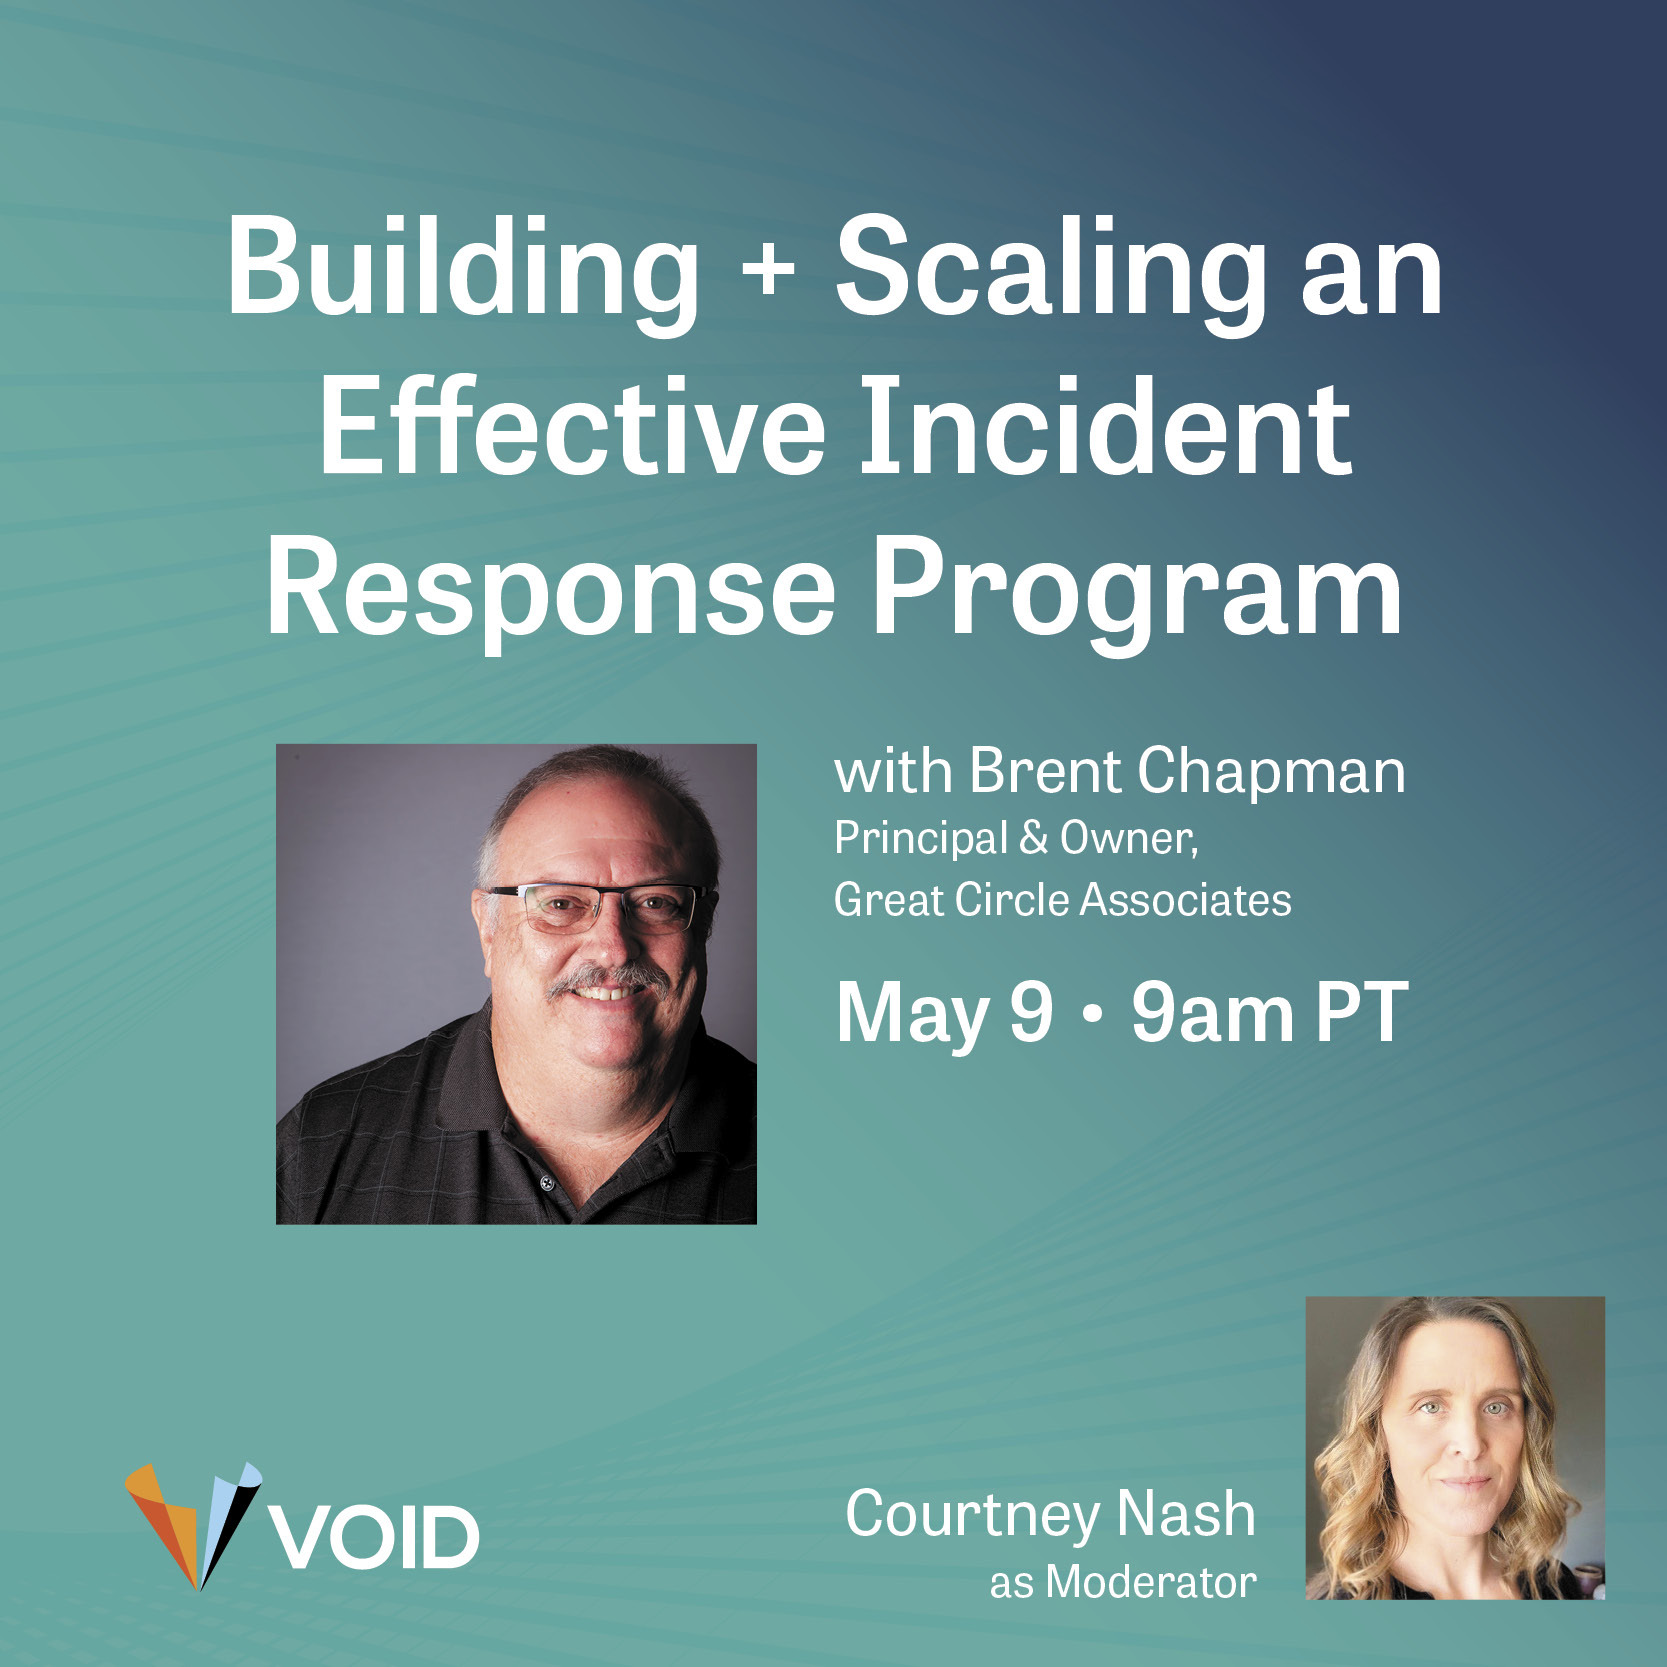 Webinar promotional image with speaker headshots on a light blue background. Text reads: Building and Scaling an Effective Incident Response Program. Timing: May 9th @ 9 am PT